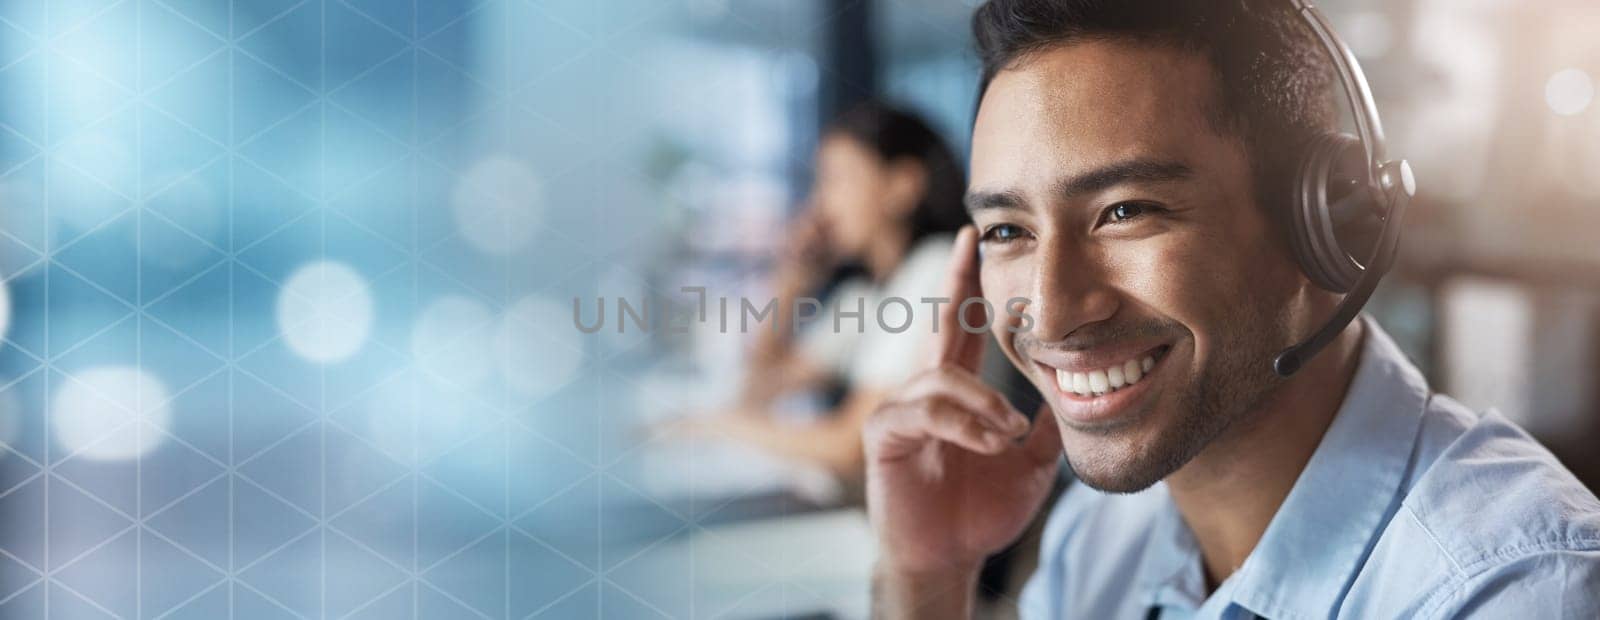 Contact us, mockup or man in a call center with a happy smile helping, talking or networking online. Face, crm or insurance agent in communication or conversation at customer services or sales office.